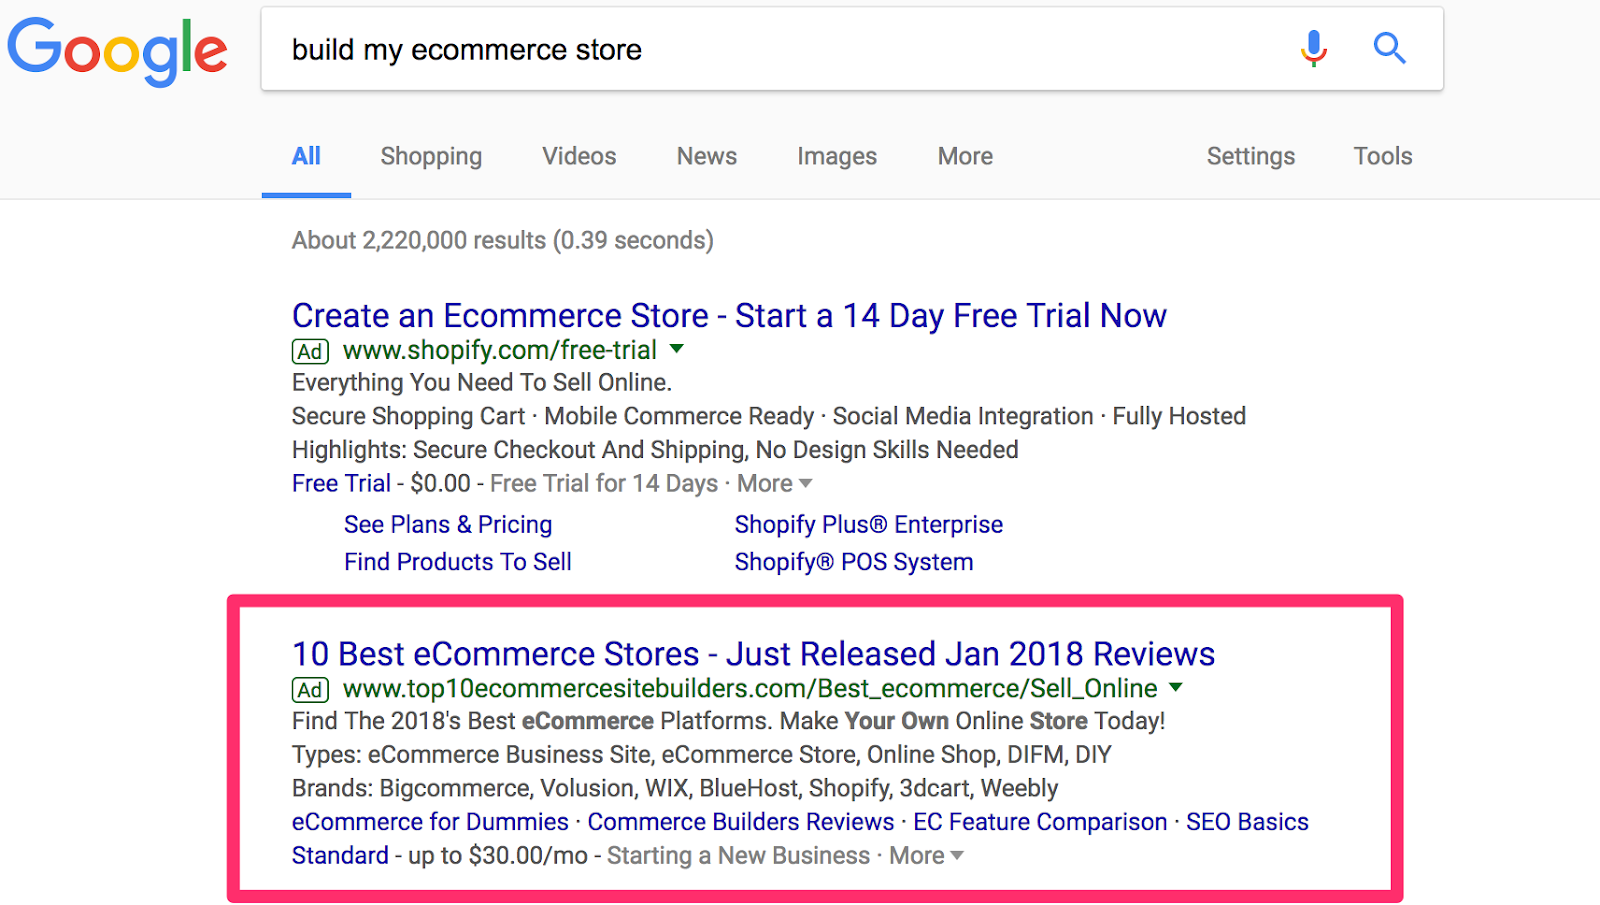 build my ecommerce store Google Search 1